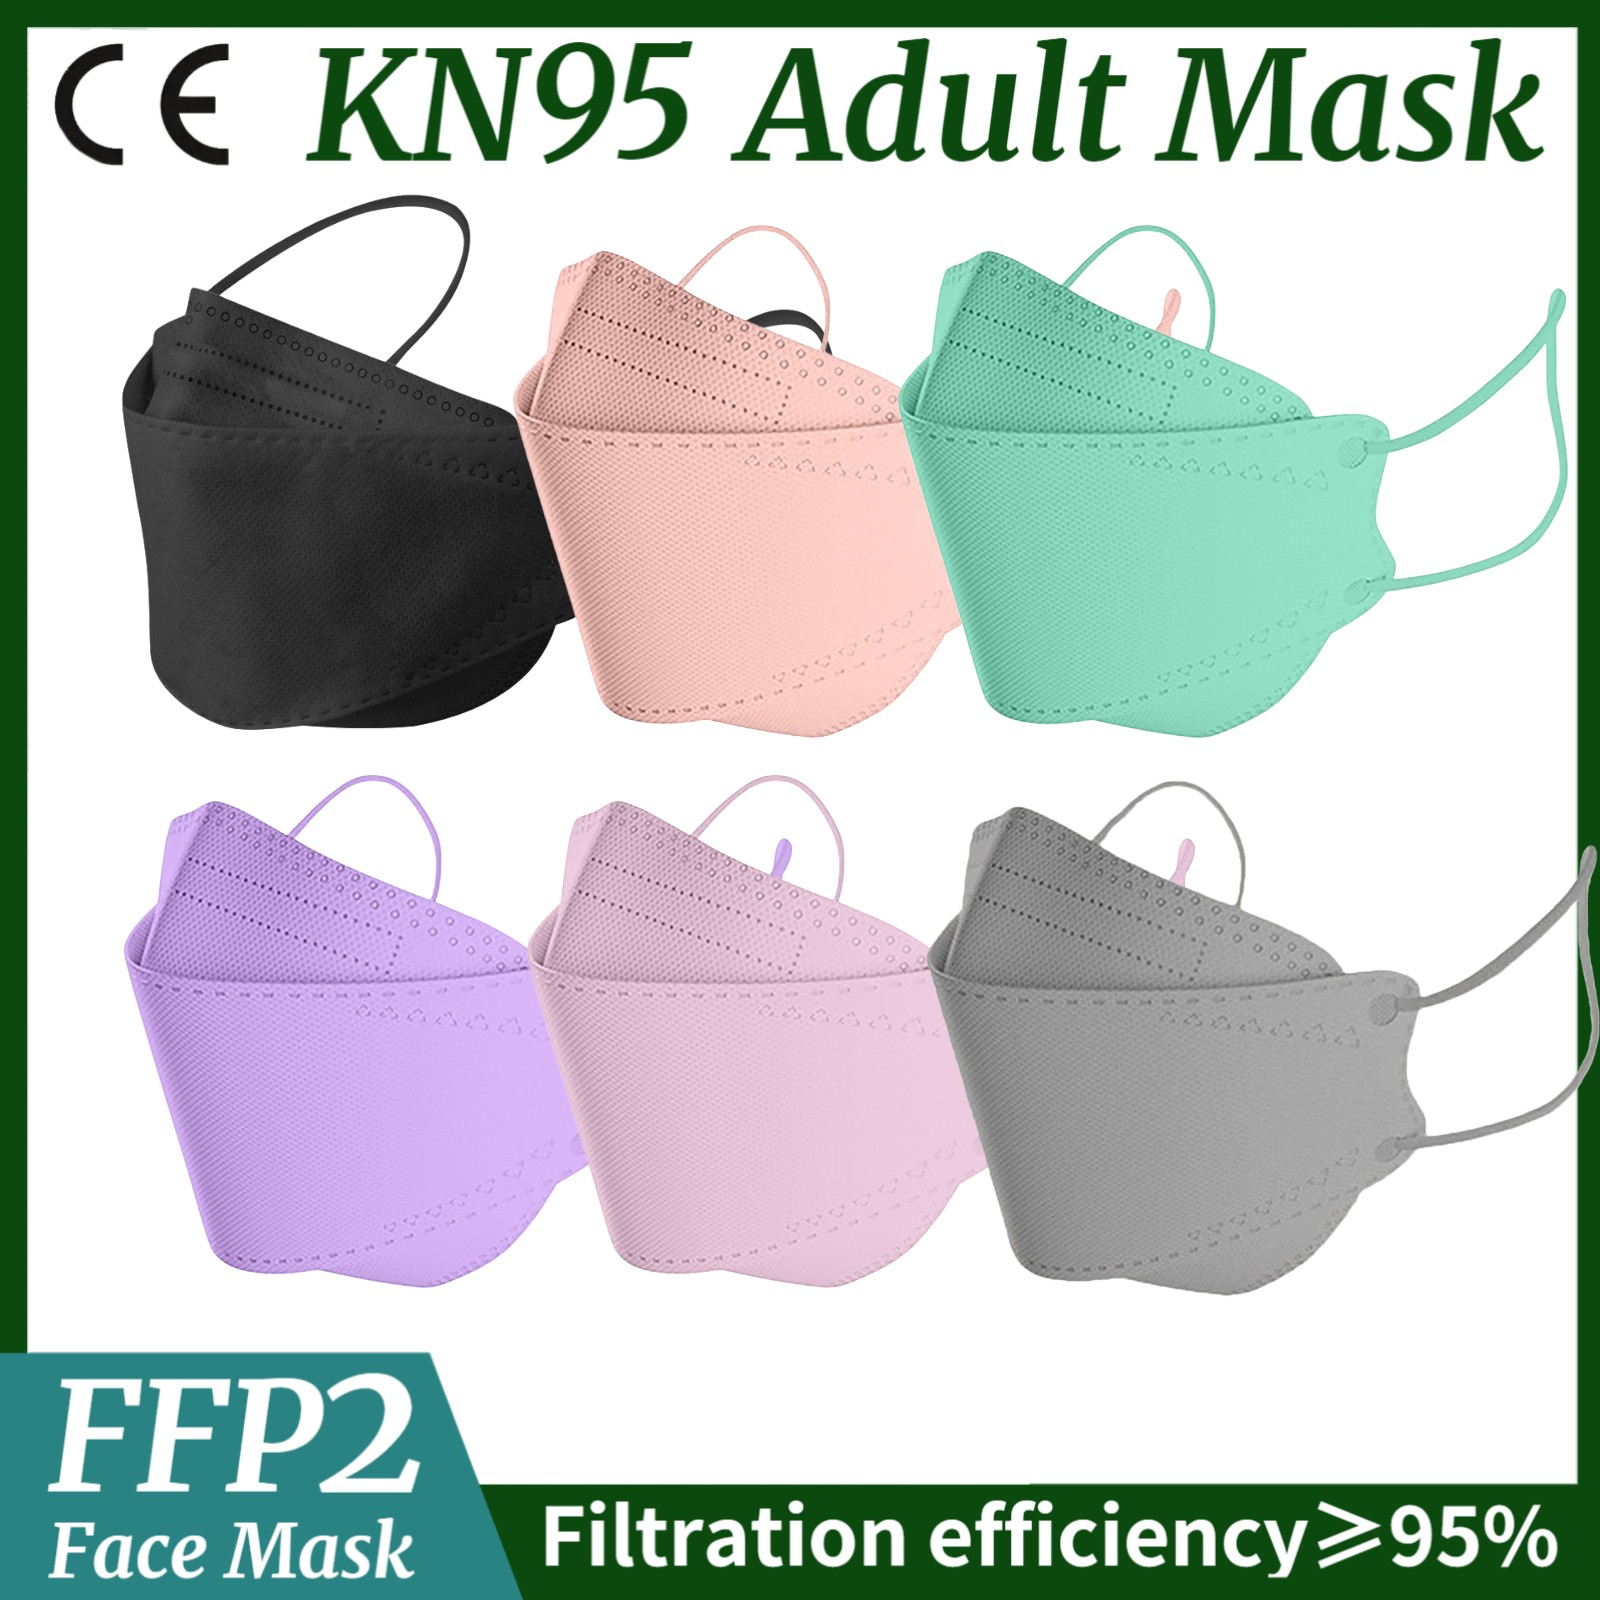 10-200pcs Mascarillas KN95 Certified 5 Layers Black KN95 Masks Colorful ffp2mascarilla Adult FP2 FPP2 Approved Mask FFP2